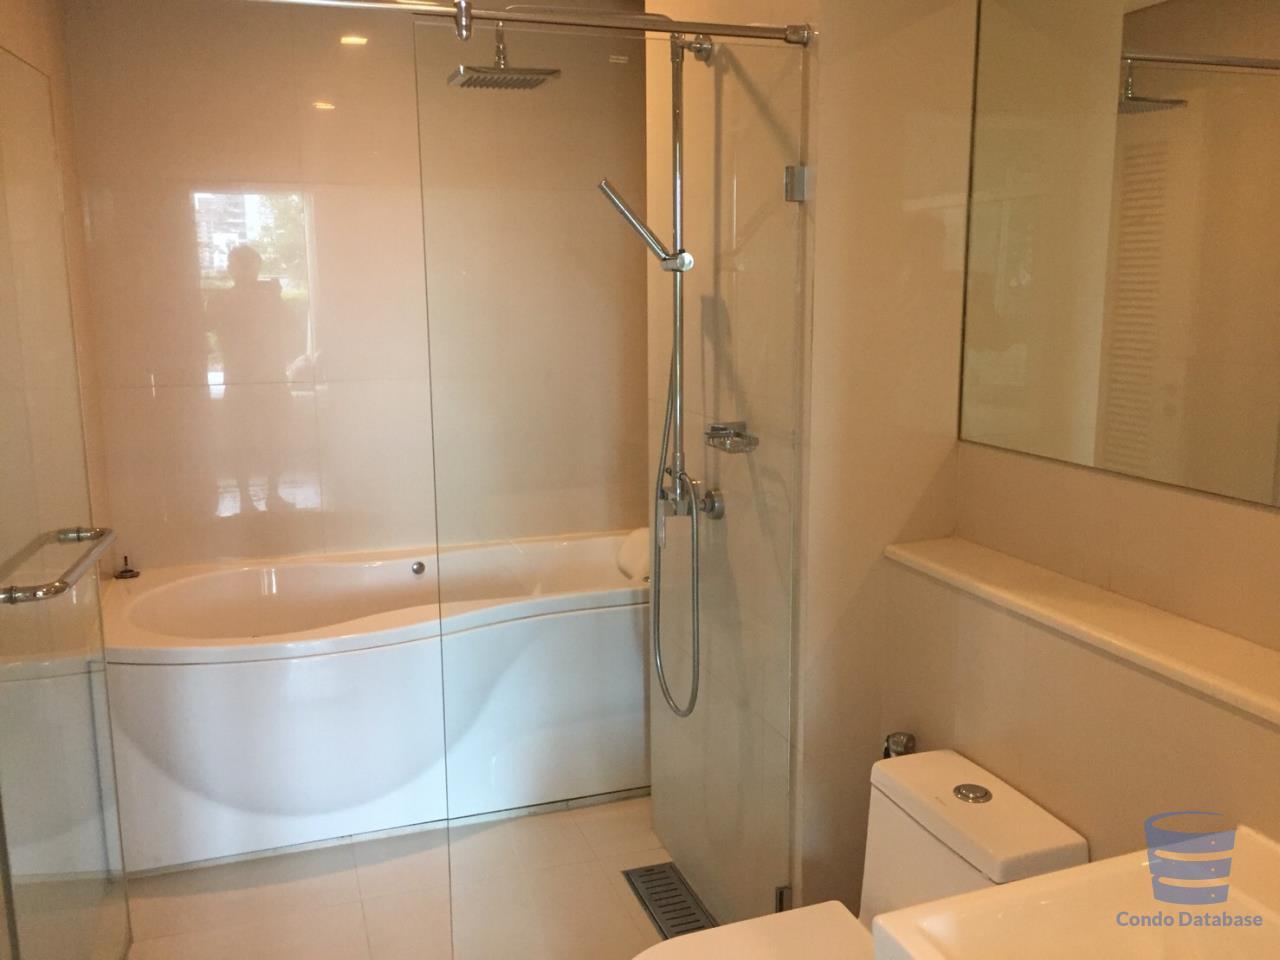 Condo Database Agency's [Property ID: 100-113-26930] 1 Bedrooms 1 Bathrooms Size 43Sqm At Ivy Thonglor for Sale and Rent 6